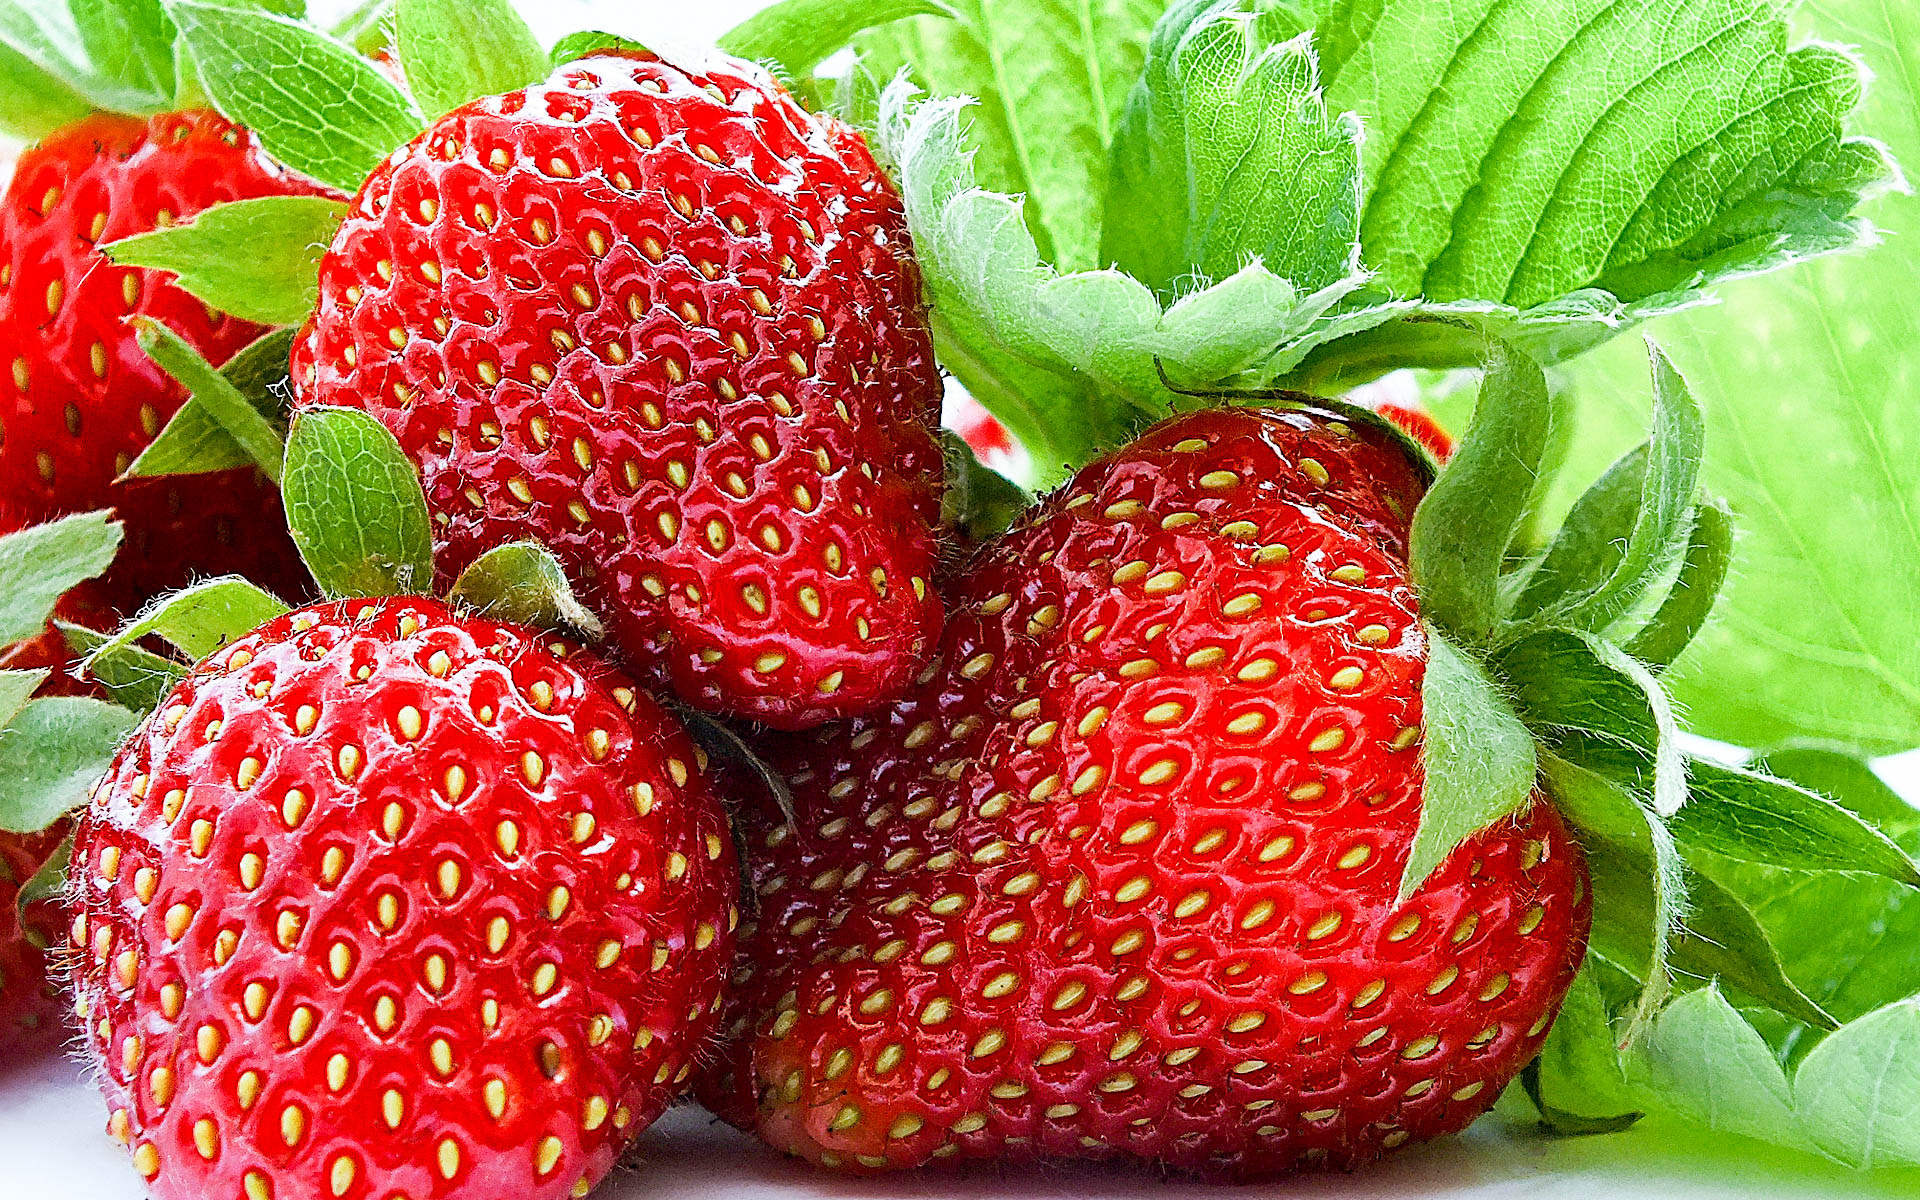 Strawberry: Fruits are cultivated for the delicious taste and attractive appearance. 1920x1200 HD Background.